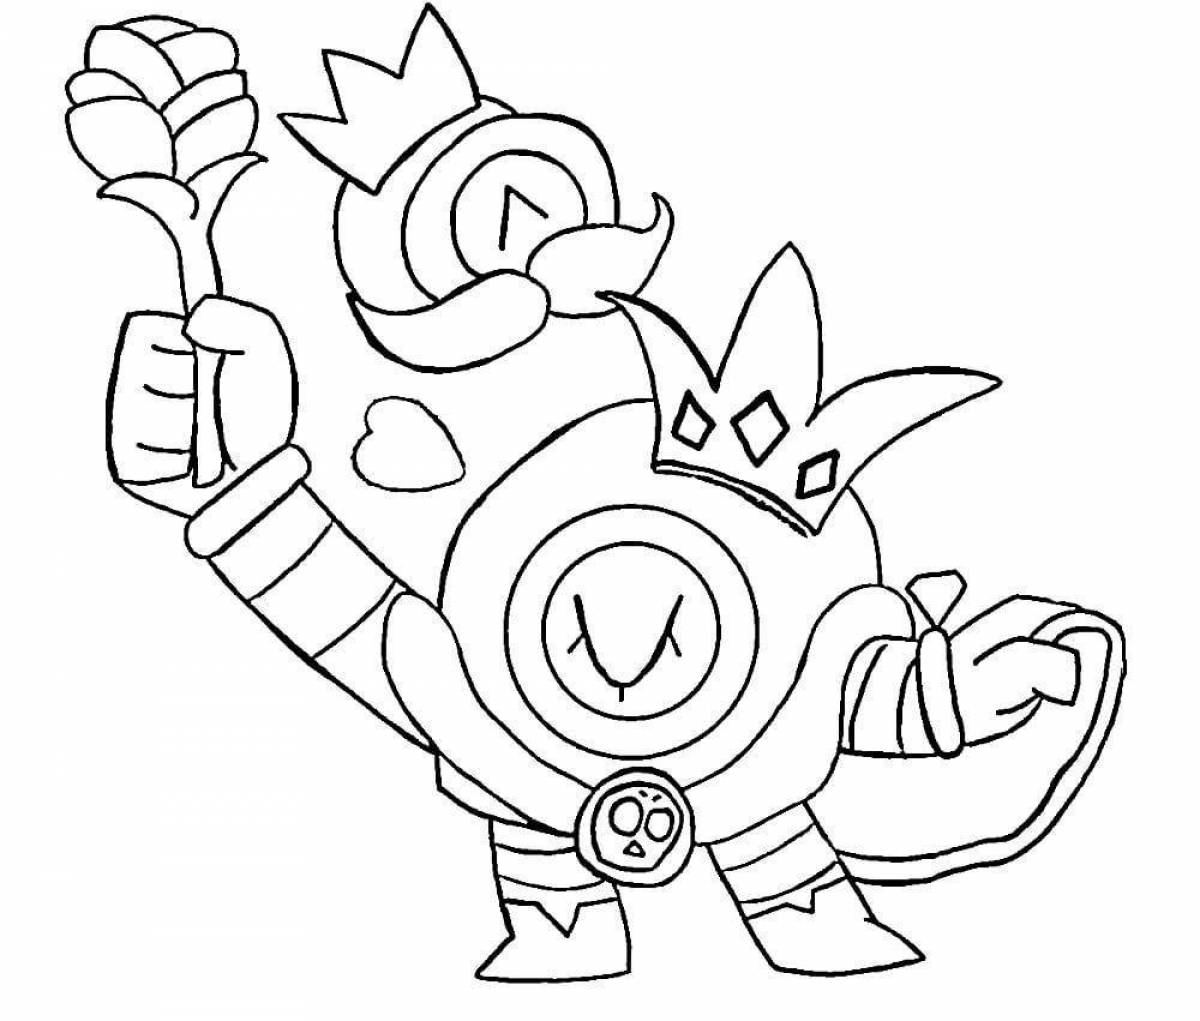 Incredible coloring pages bravo stars new heroes